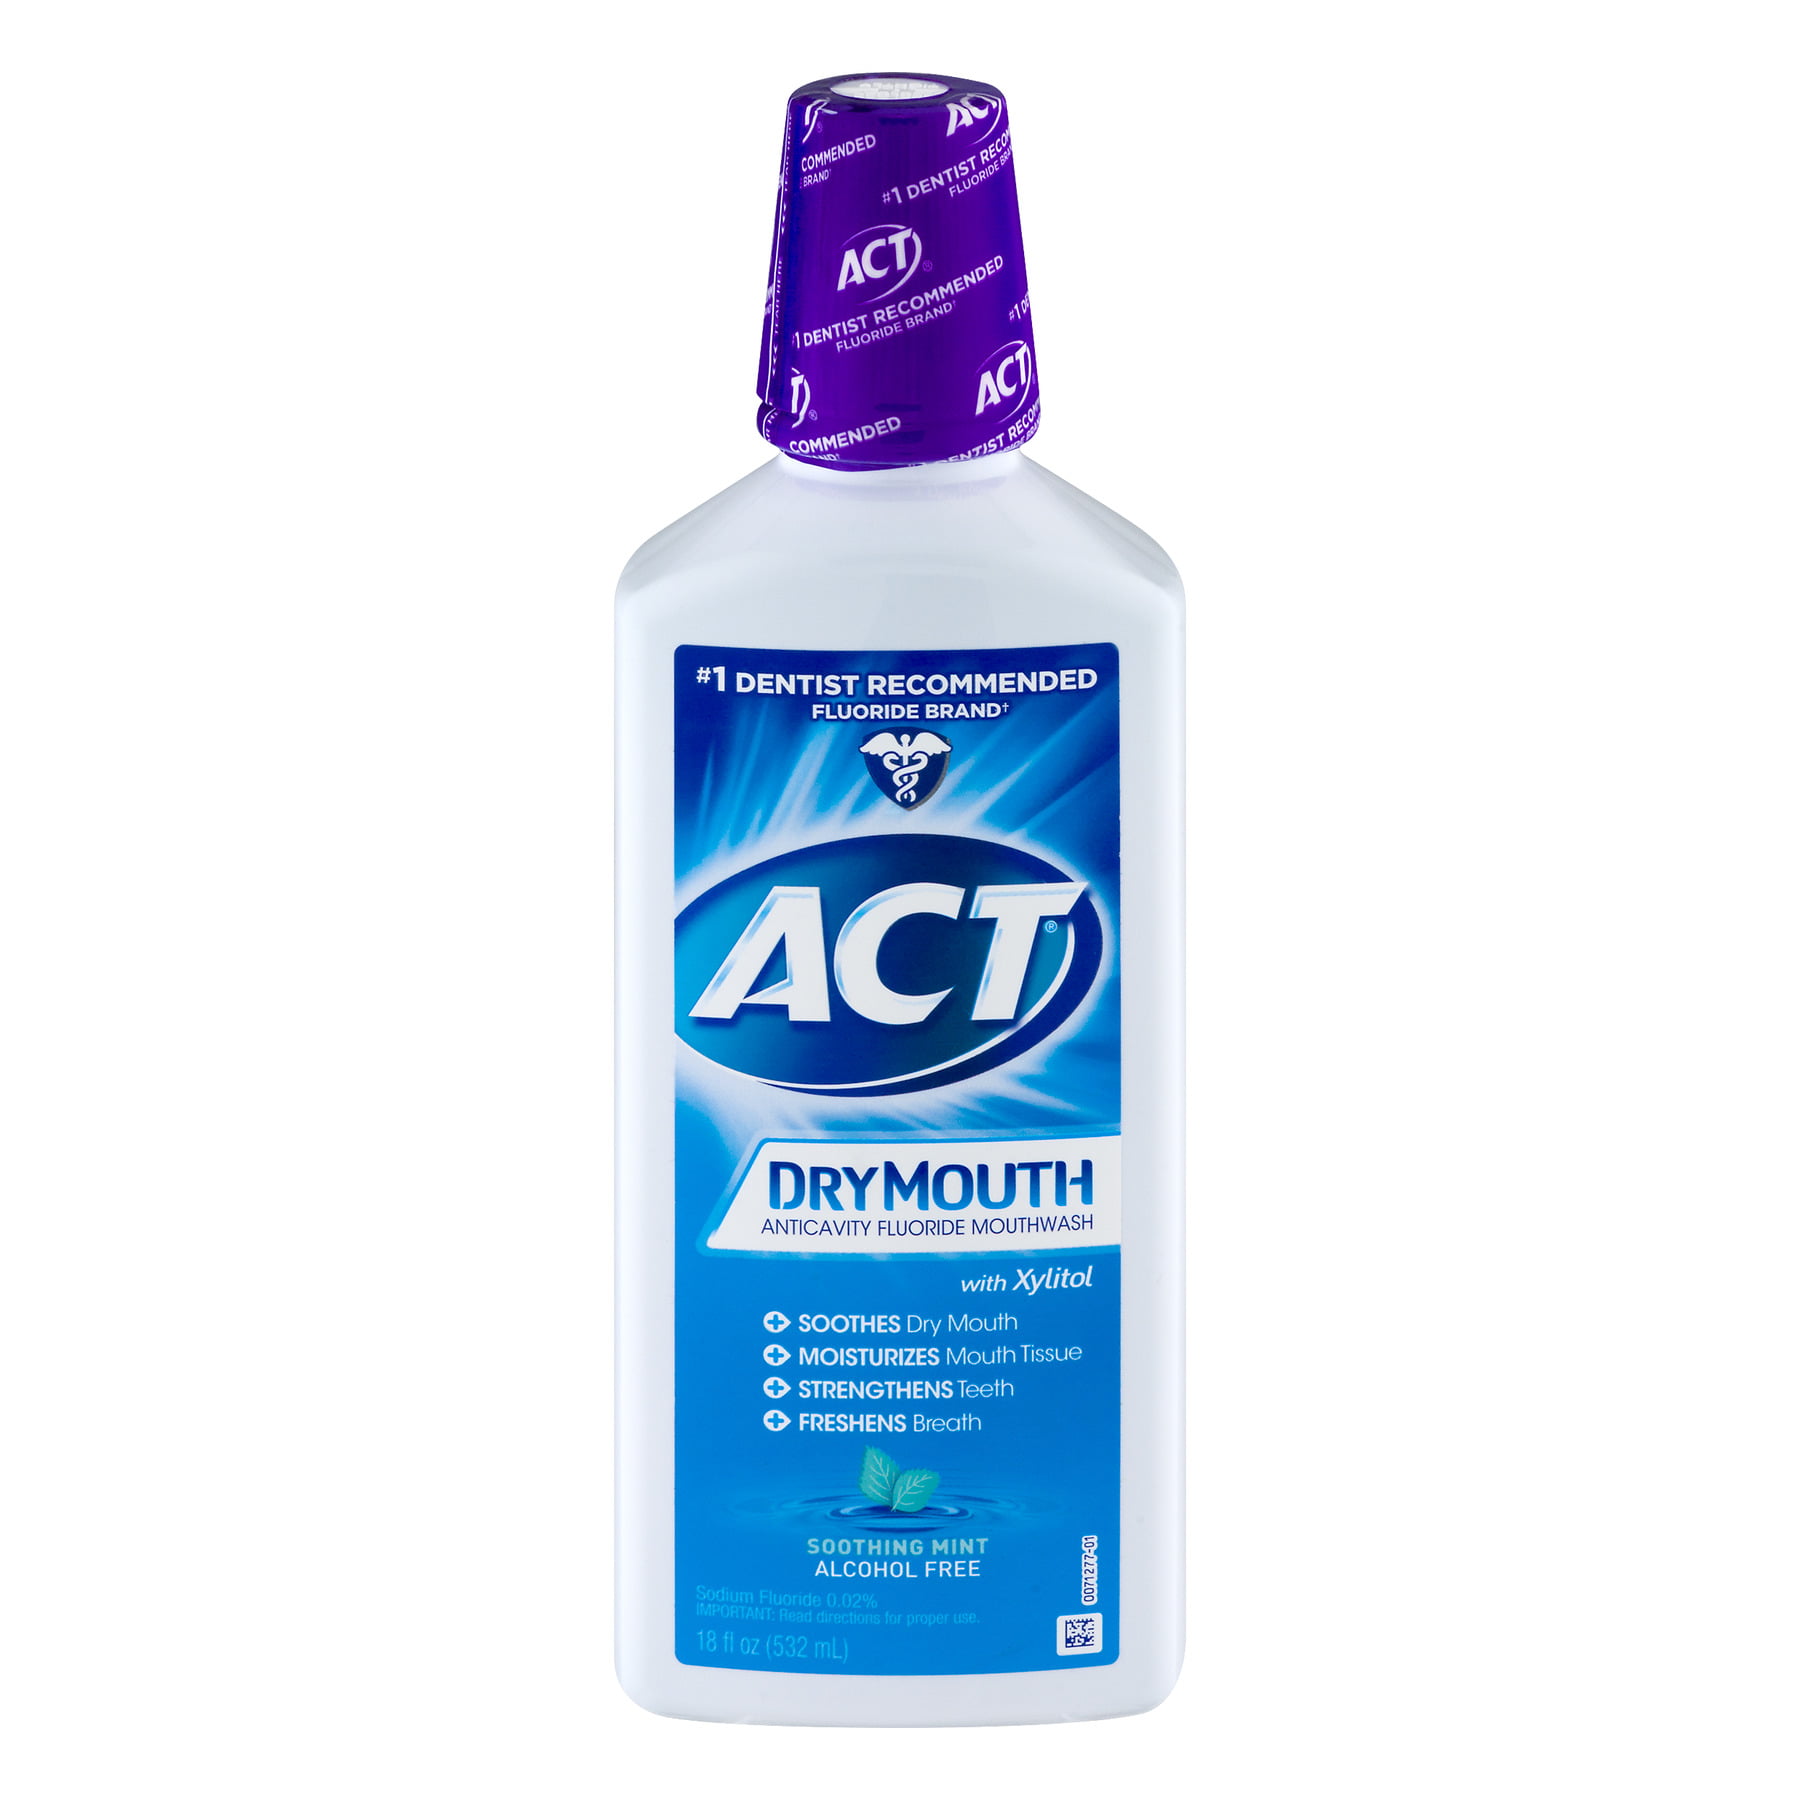 ACT Dry Mouth Mouthwash (18 Oz, Soothing Mint), with Xylitol - Walmart.com  - Walmart.com